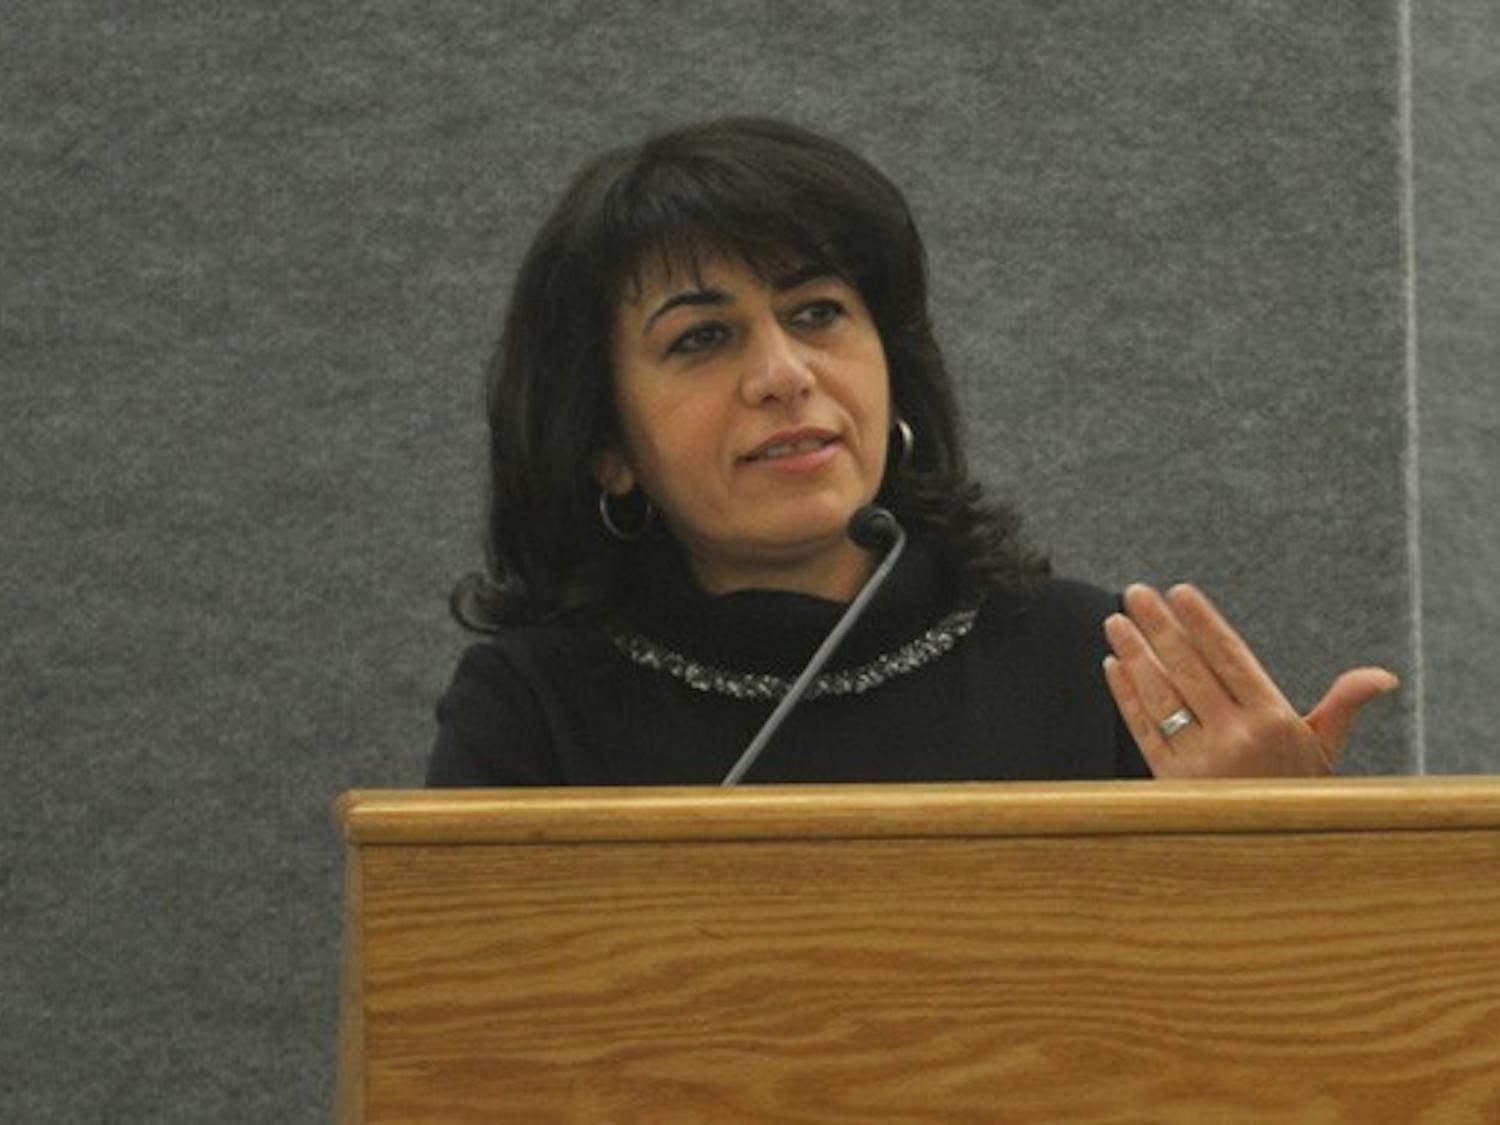 Award-winning Iraqi poet Dunya Mikhail reflects on her exile, which occurred under the regime of Saddam Hussein. Mikhail spoke as a part of DUU’s Major Speakers Series in the Bryan Center Thursday.